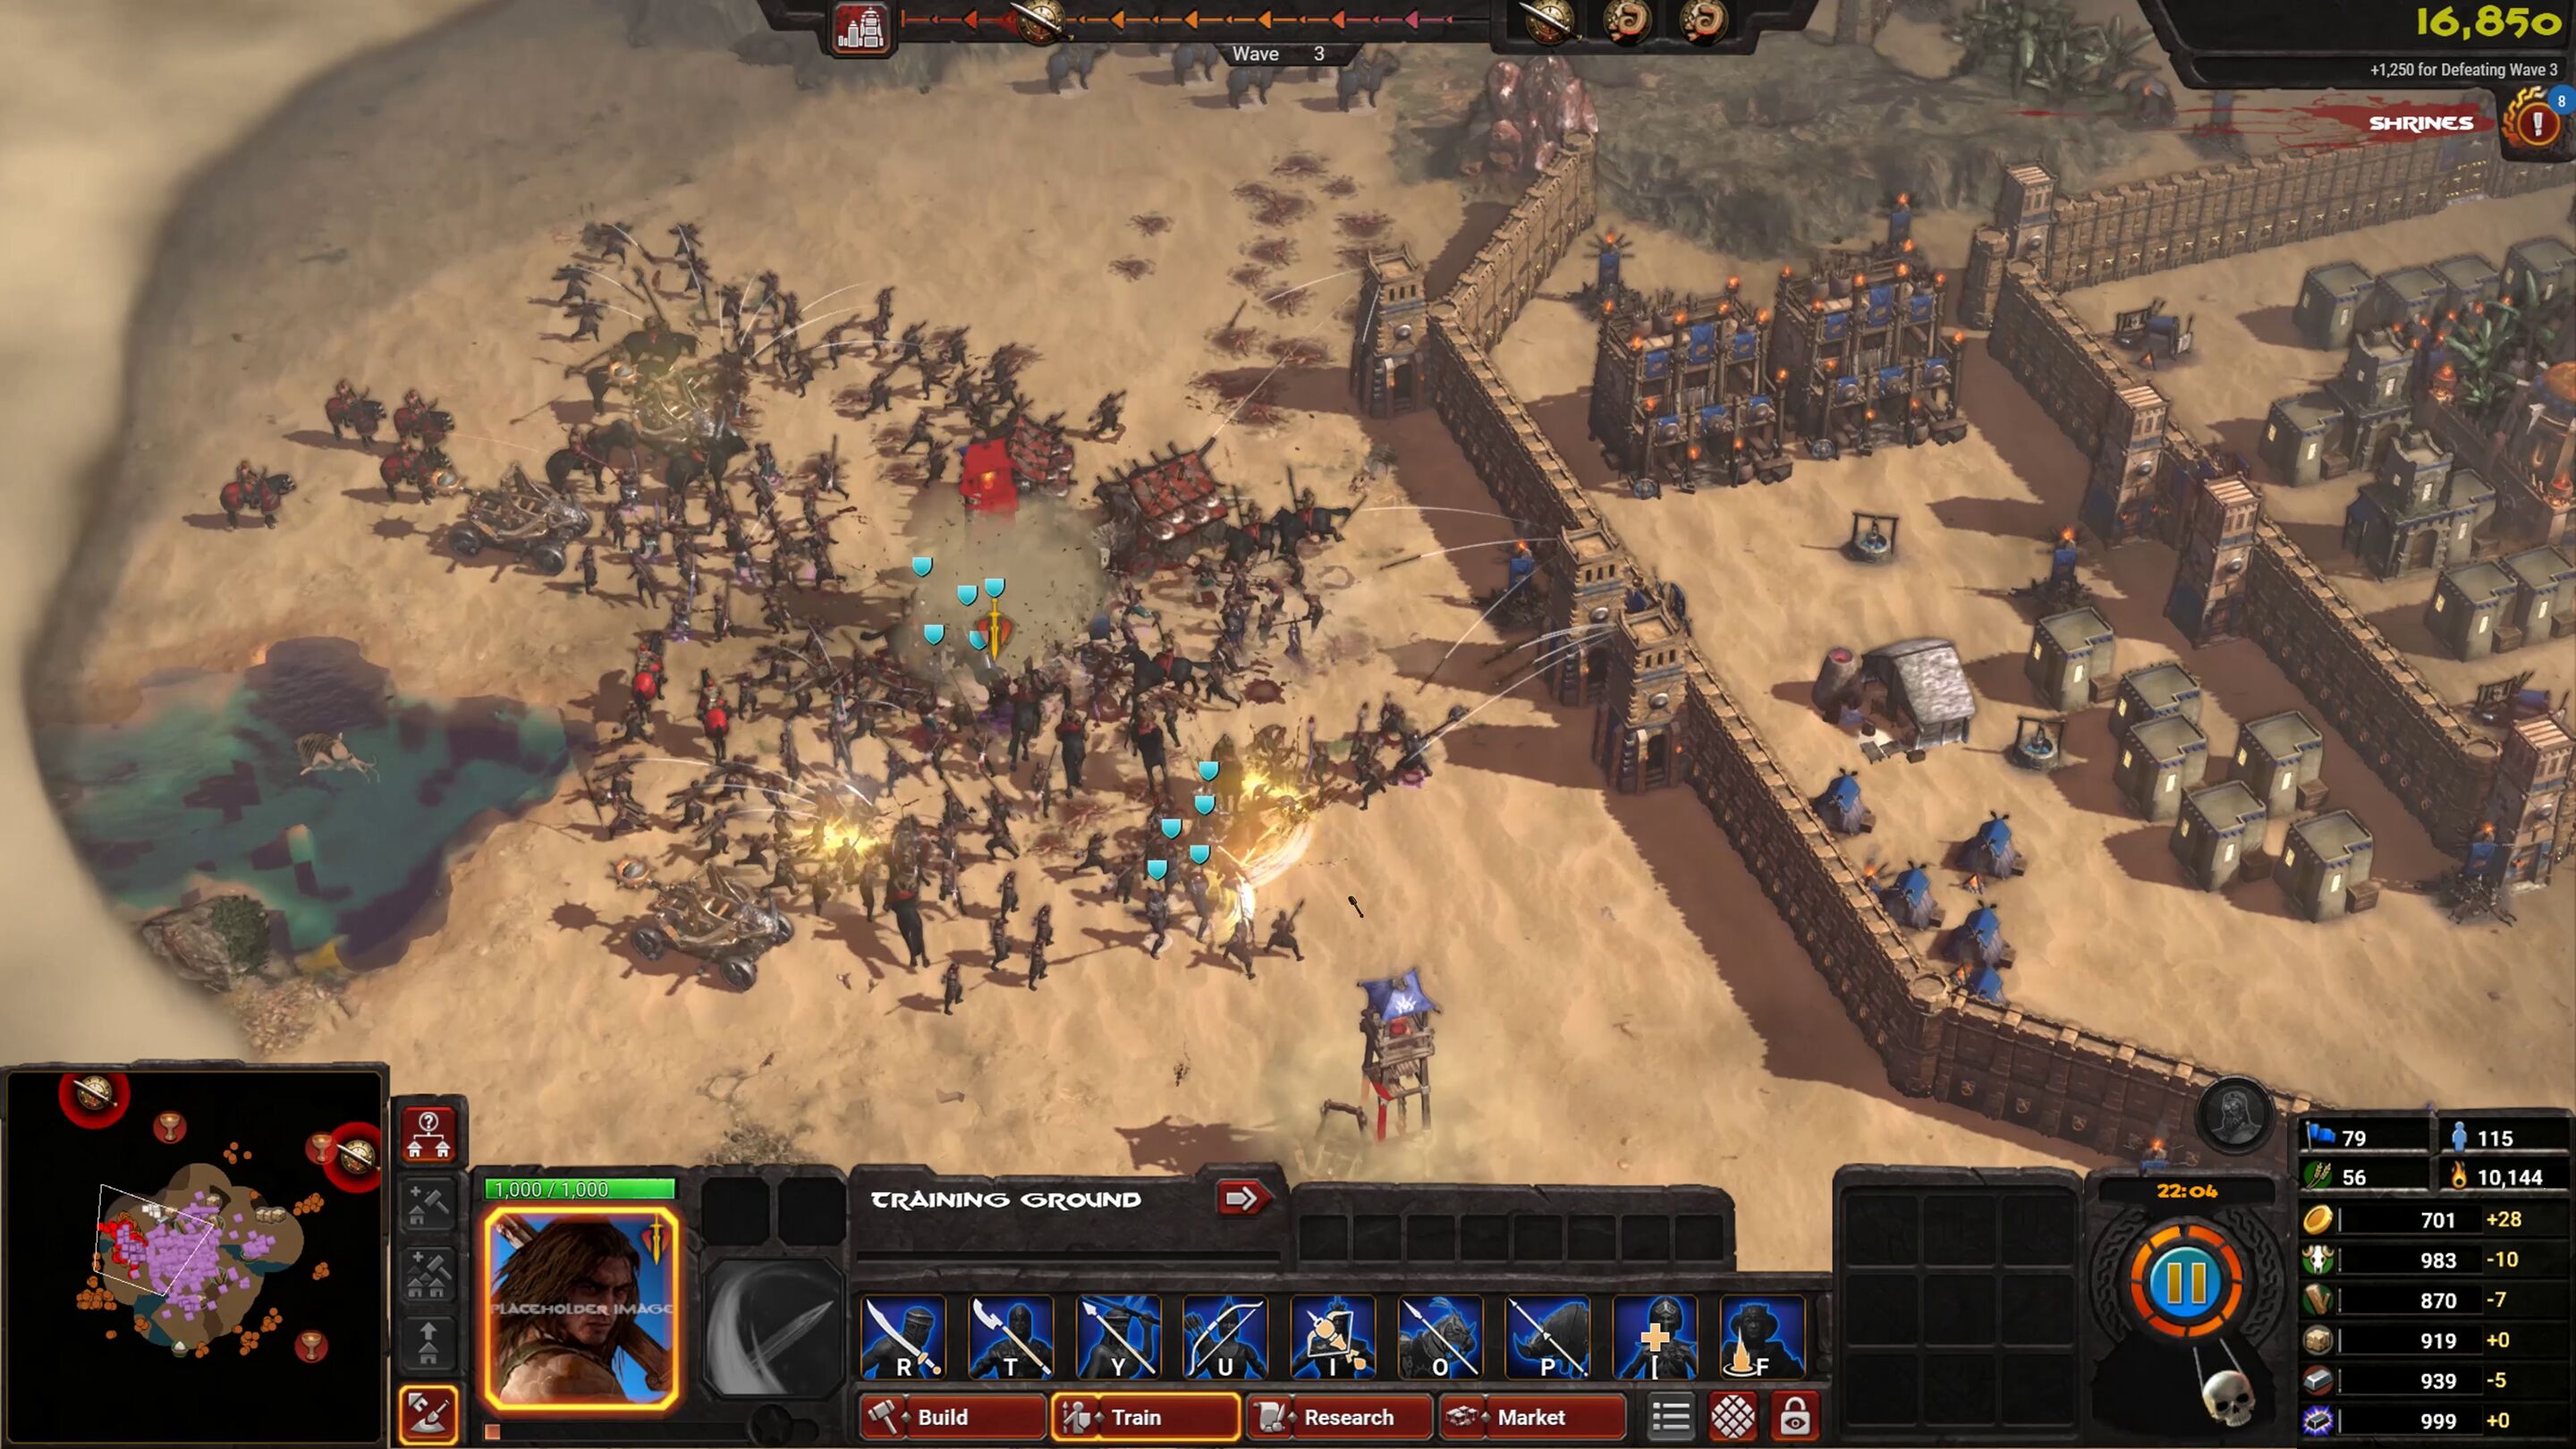 Fun coop sets Conan Unconquered apart from other survival RTS games PC Gamer